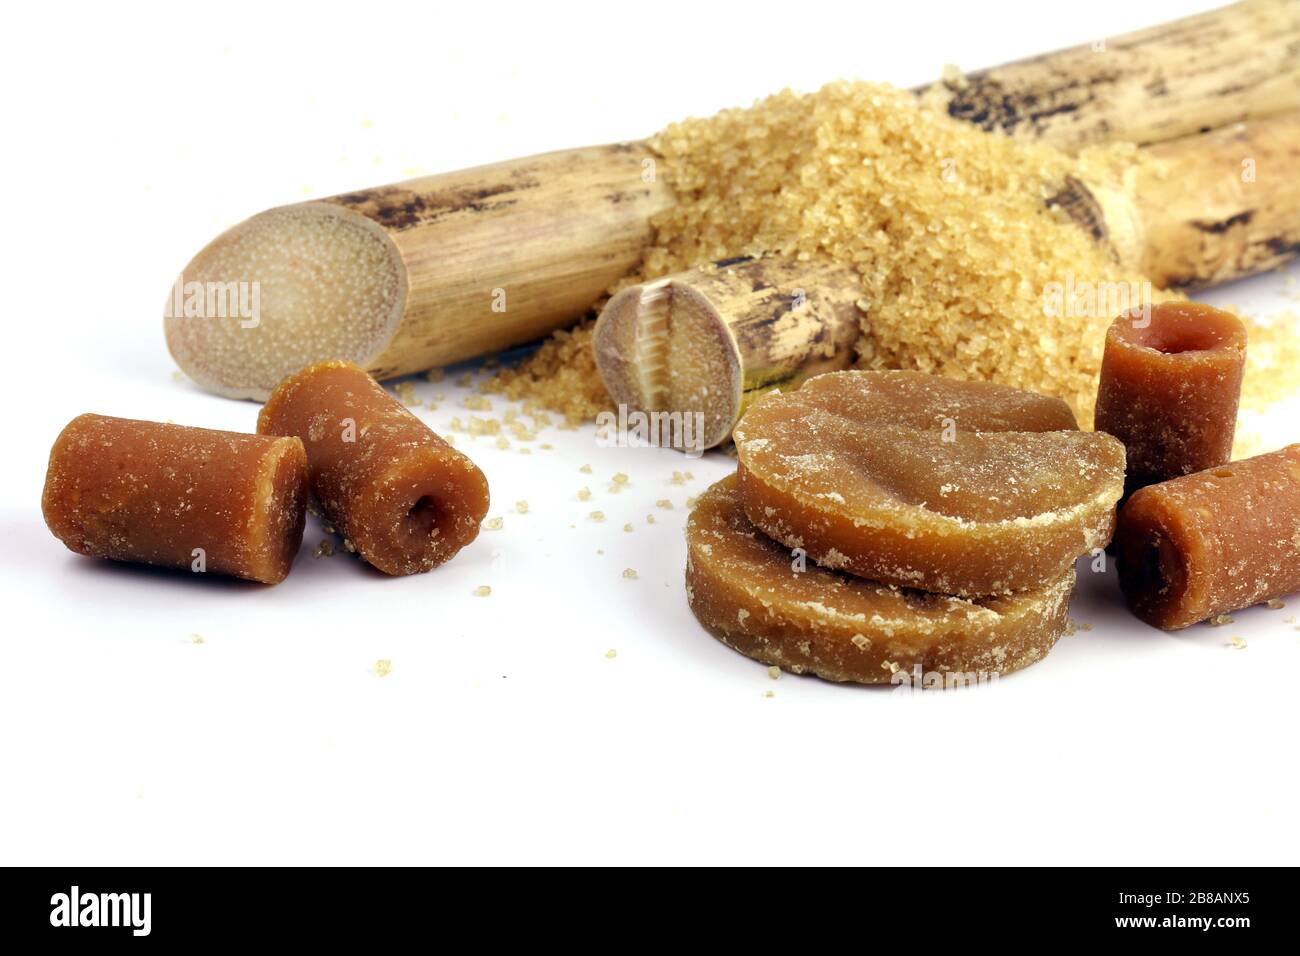 Sugarcane and pile Granulated Sugar reed solid, Cane, Sugar reed solid concentrate, Sugar cubes brown from Sugarcane and various kinds of sugar brown Stock Photo